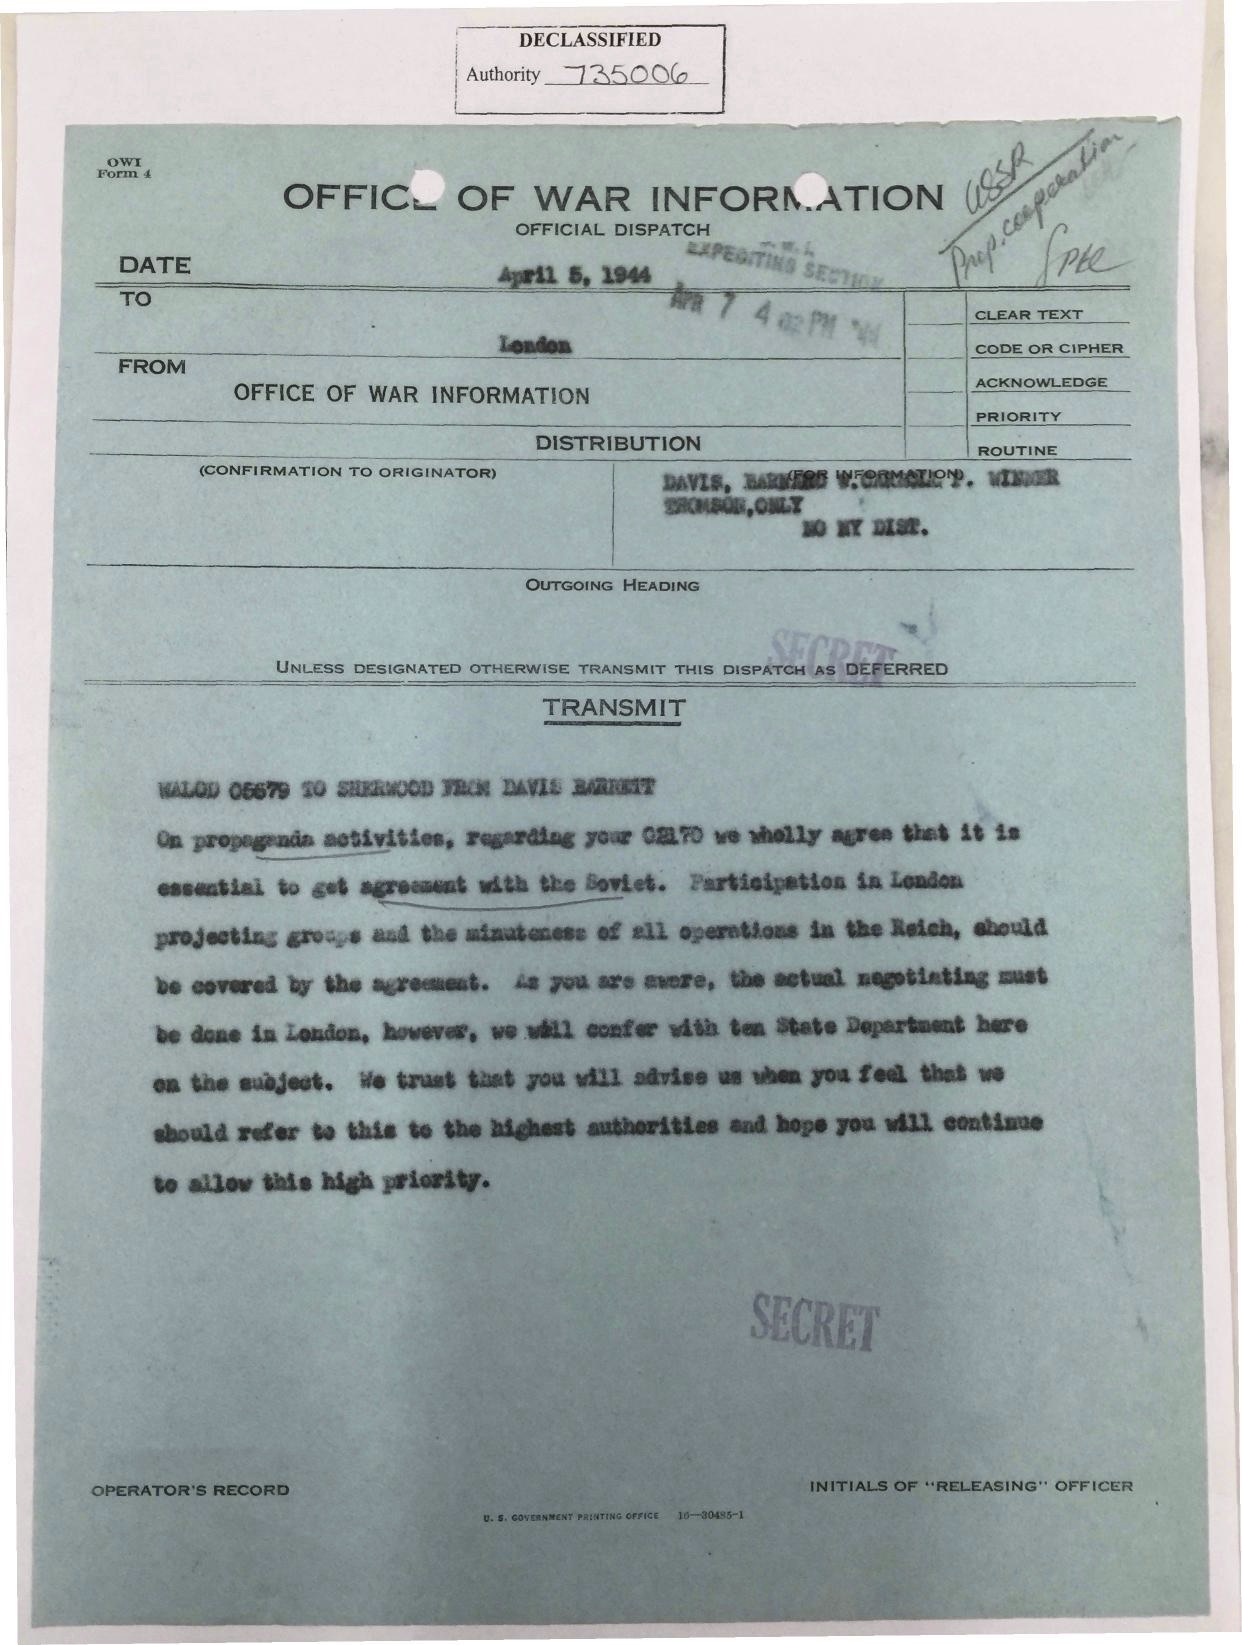 A confidential Office of War Information cable, dated April 5, 1944, from OWI Director Elmer Davis to Robert E. Sherwood in London on the need to coordinate American and Soviet propaganda.